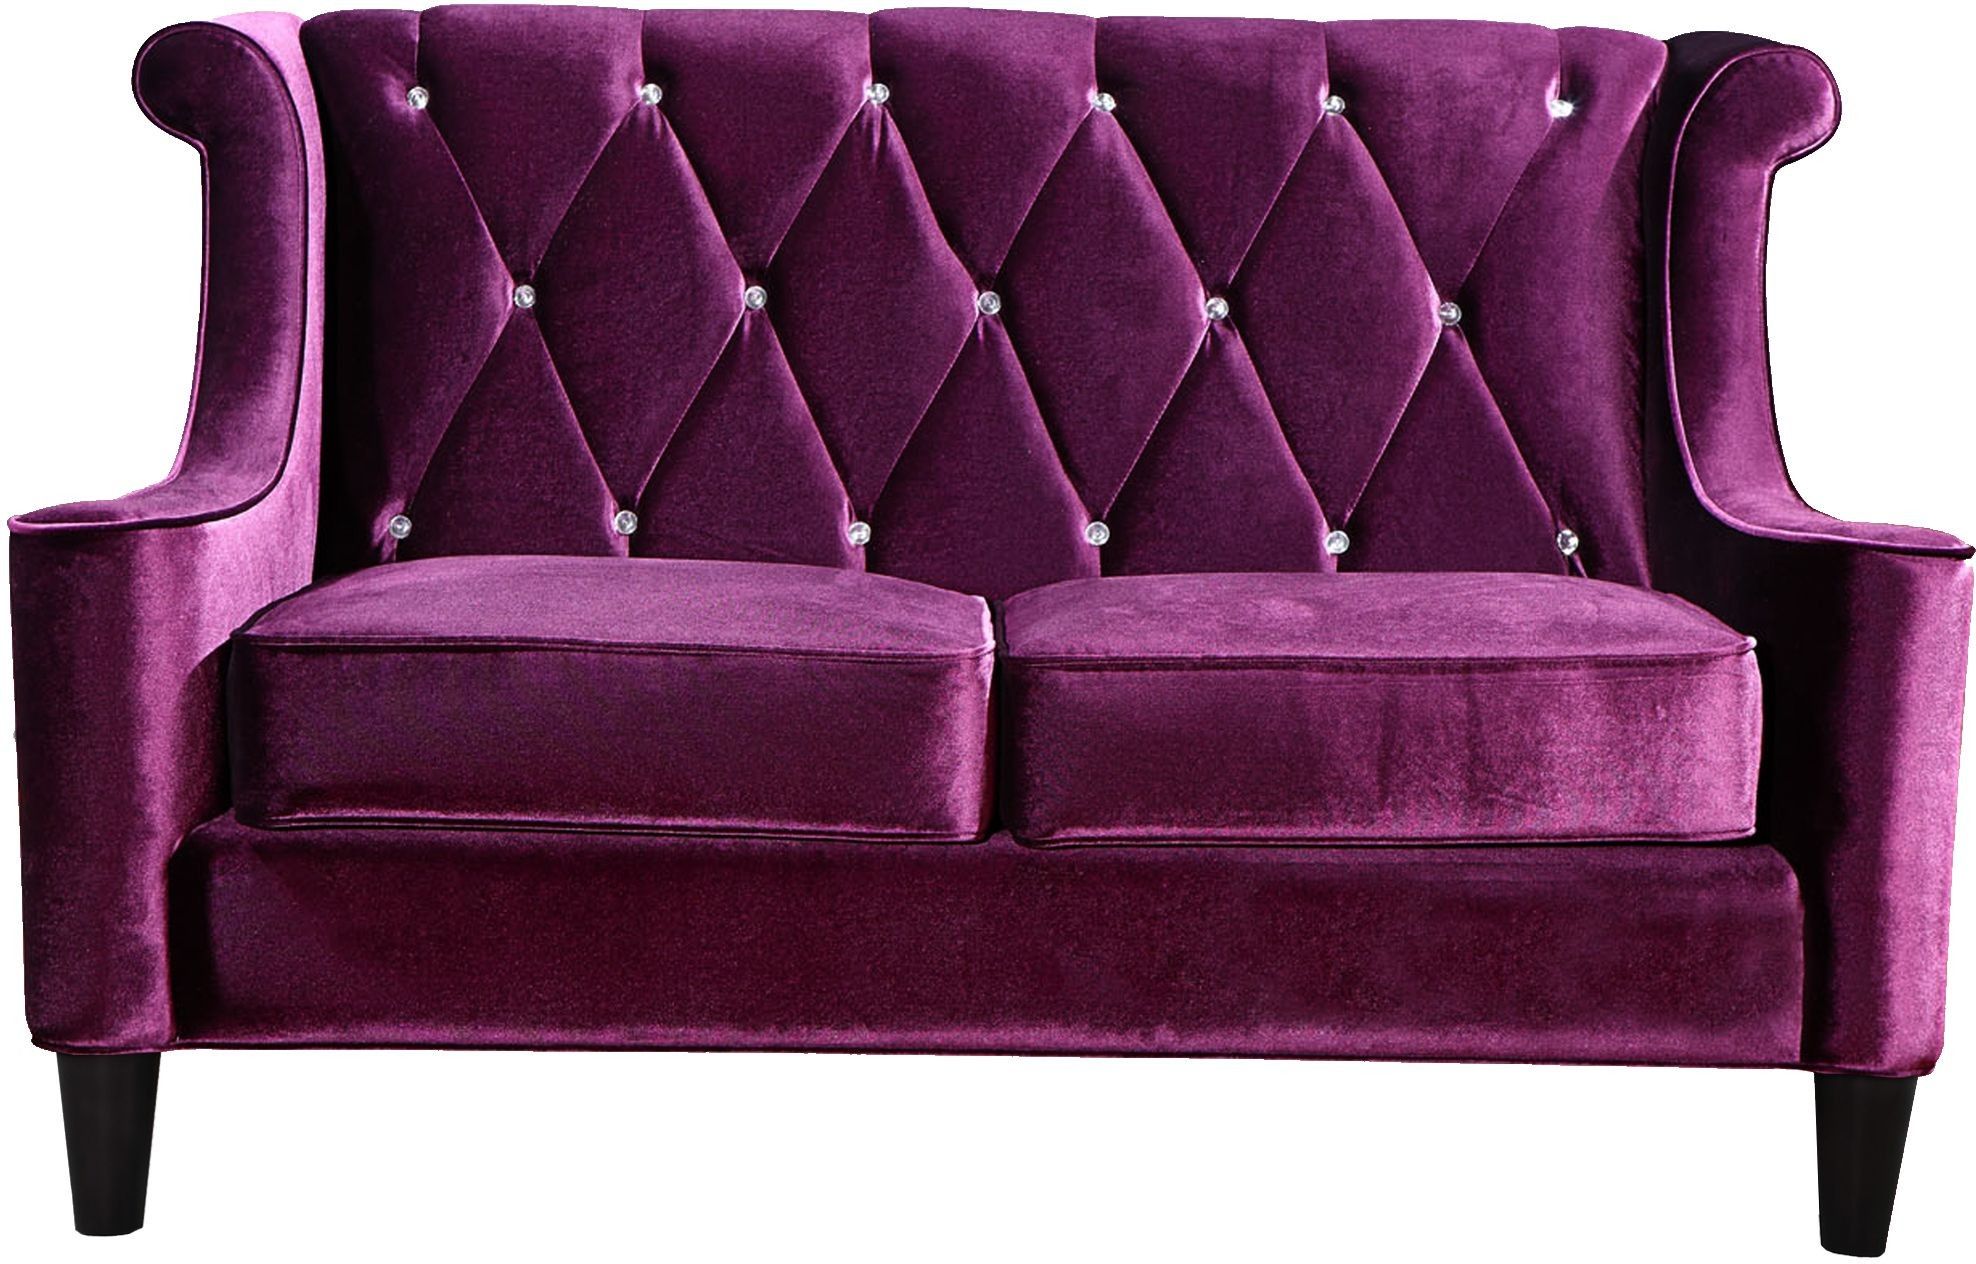 Barrister Purple Velvet Loveseat From Armen Living | Coleman Furniture With Regard To Small Love Seats In Velvet (View 5 of 21)